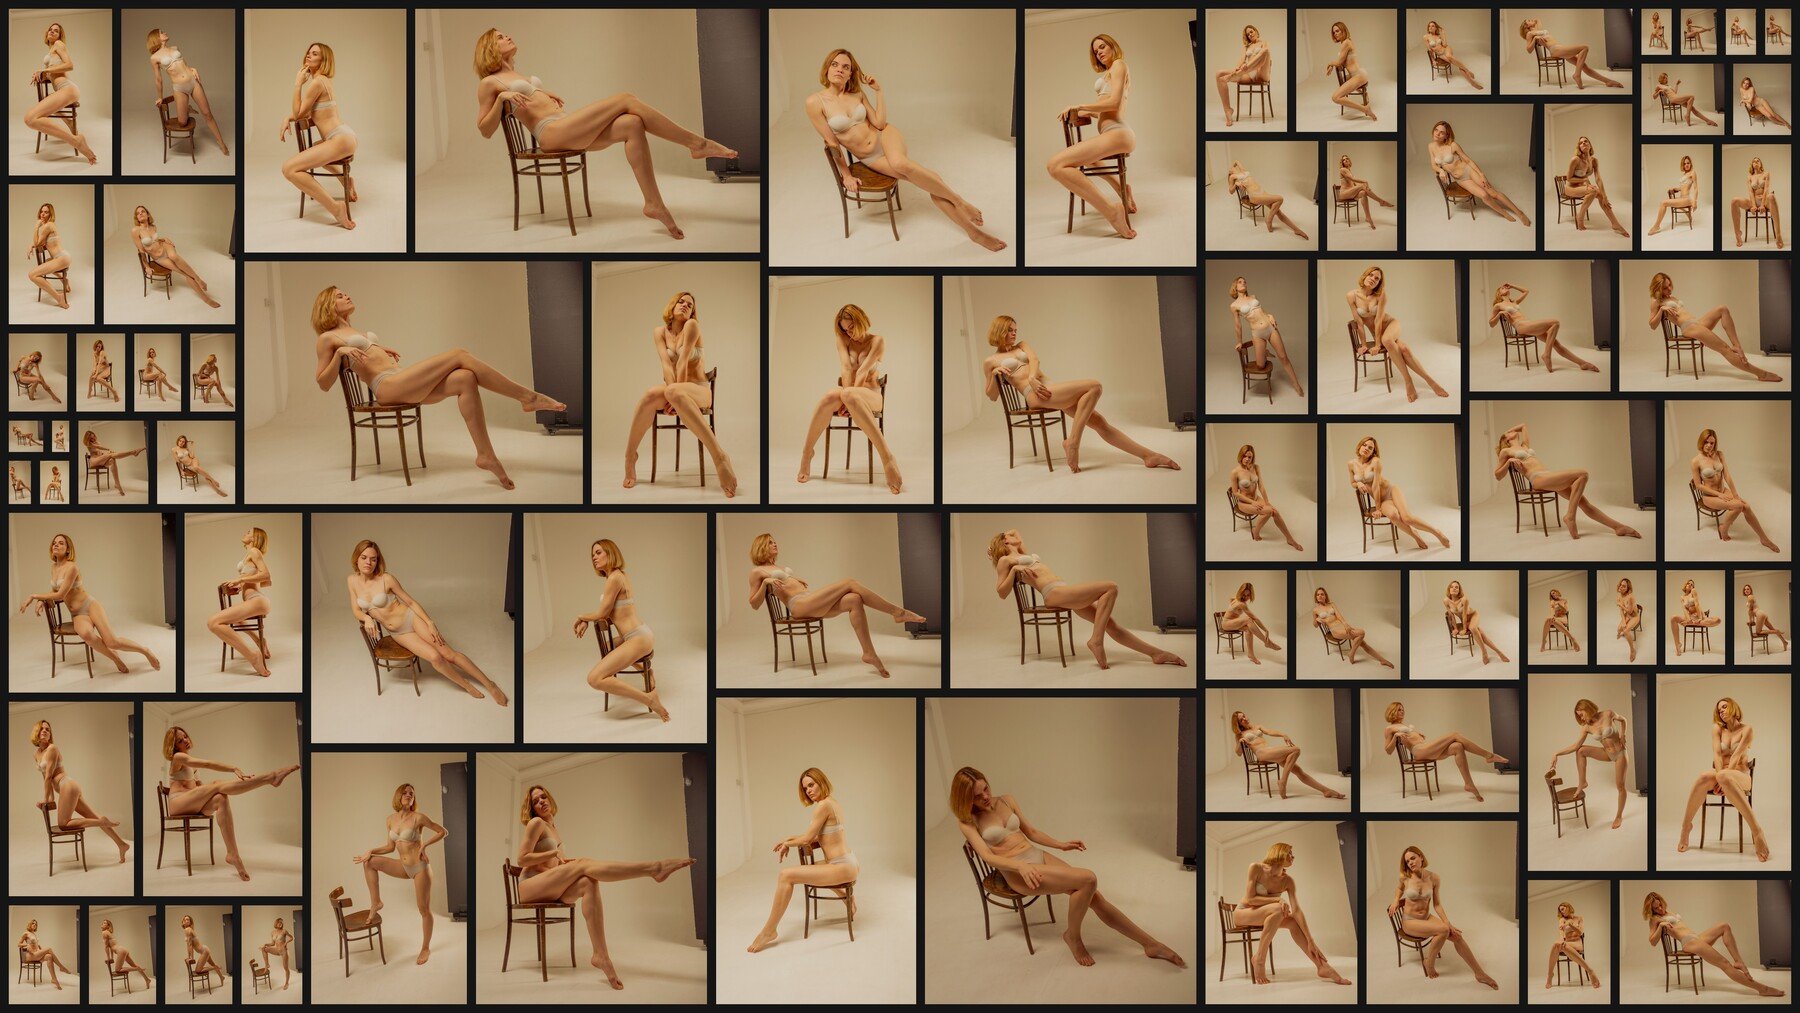 270+ Seductive Poses - Reference Image